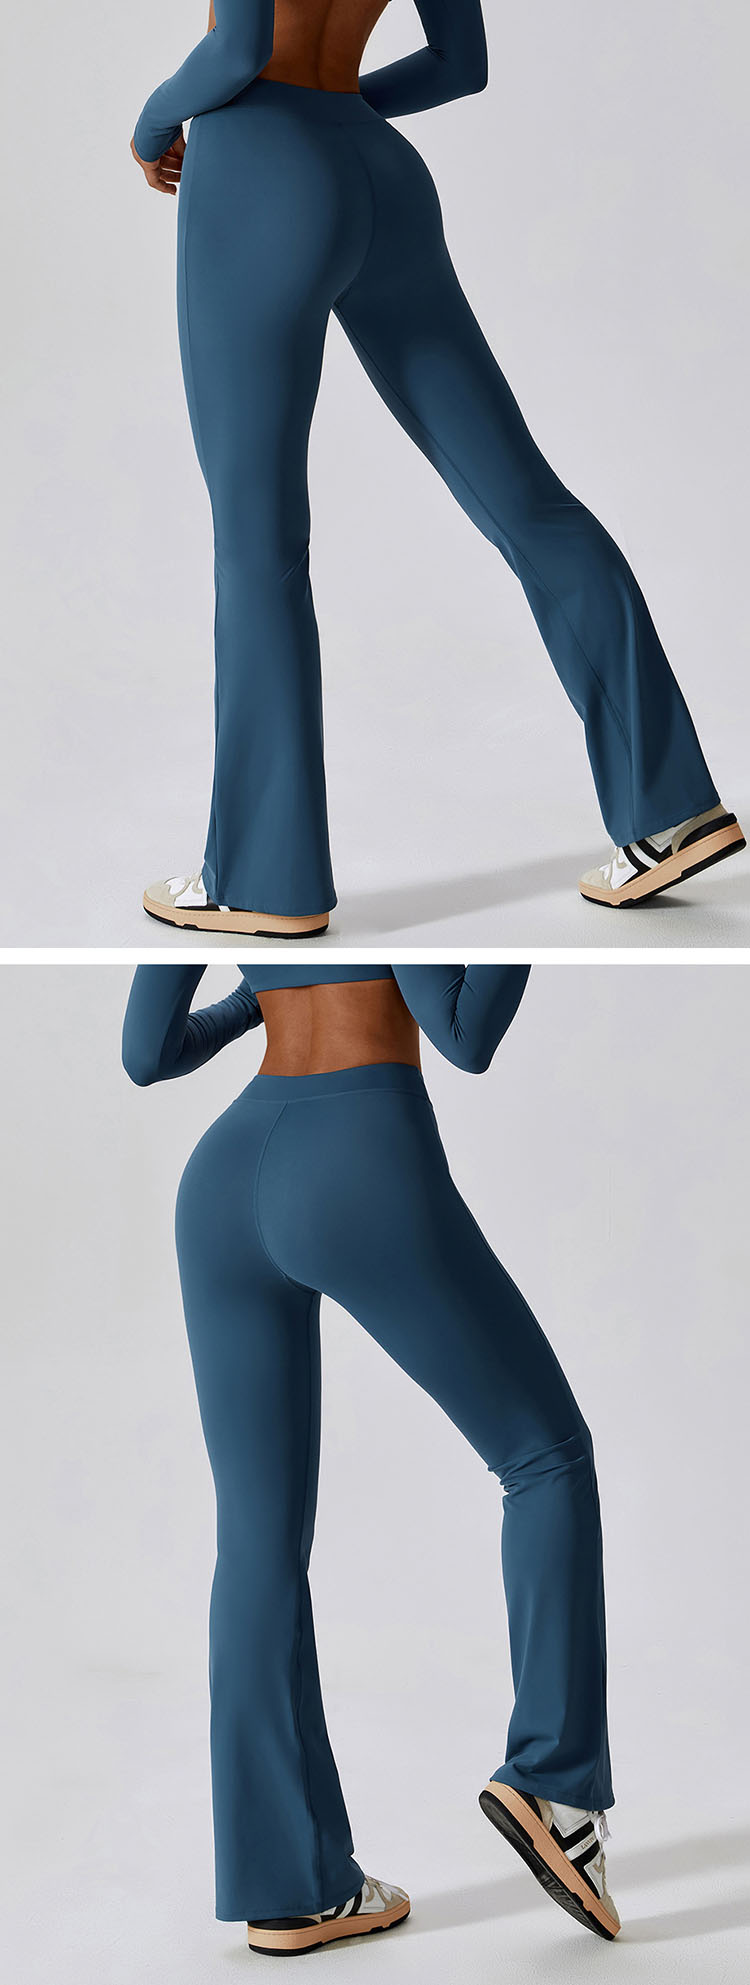 Slim-fit version design is adopted to show the figure curve, which is slim and slim